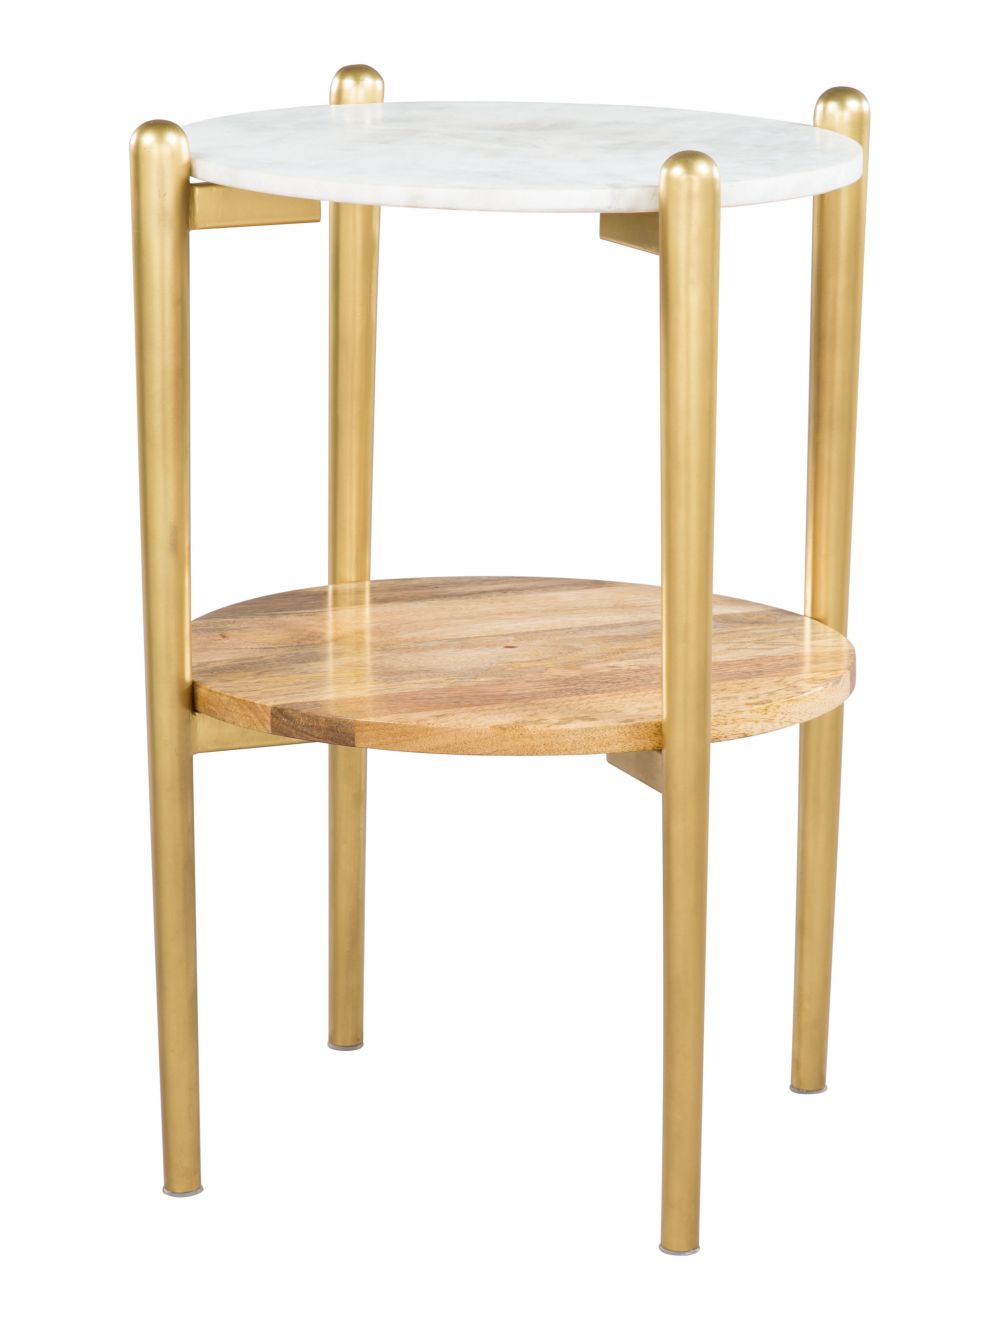 Mina Marble Side Table White & Gold